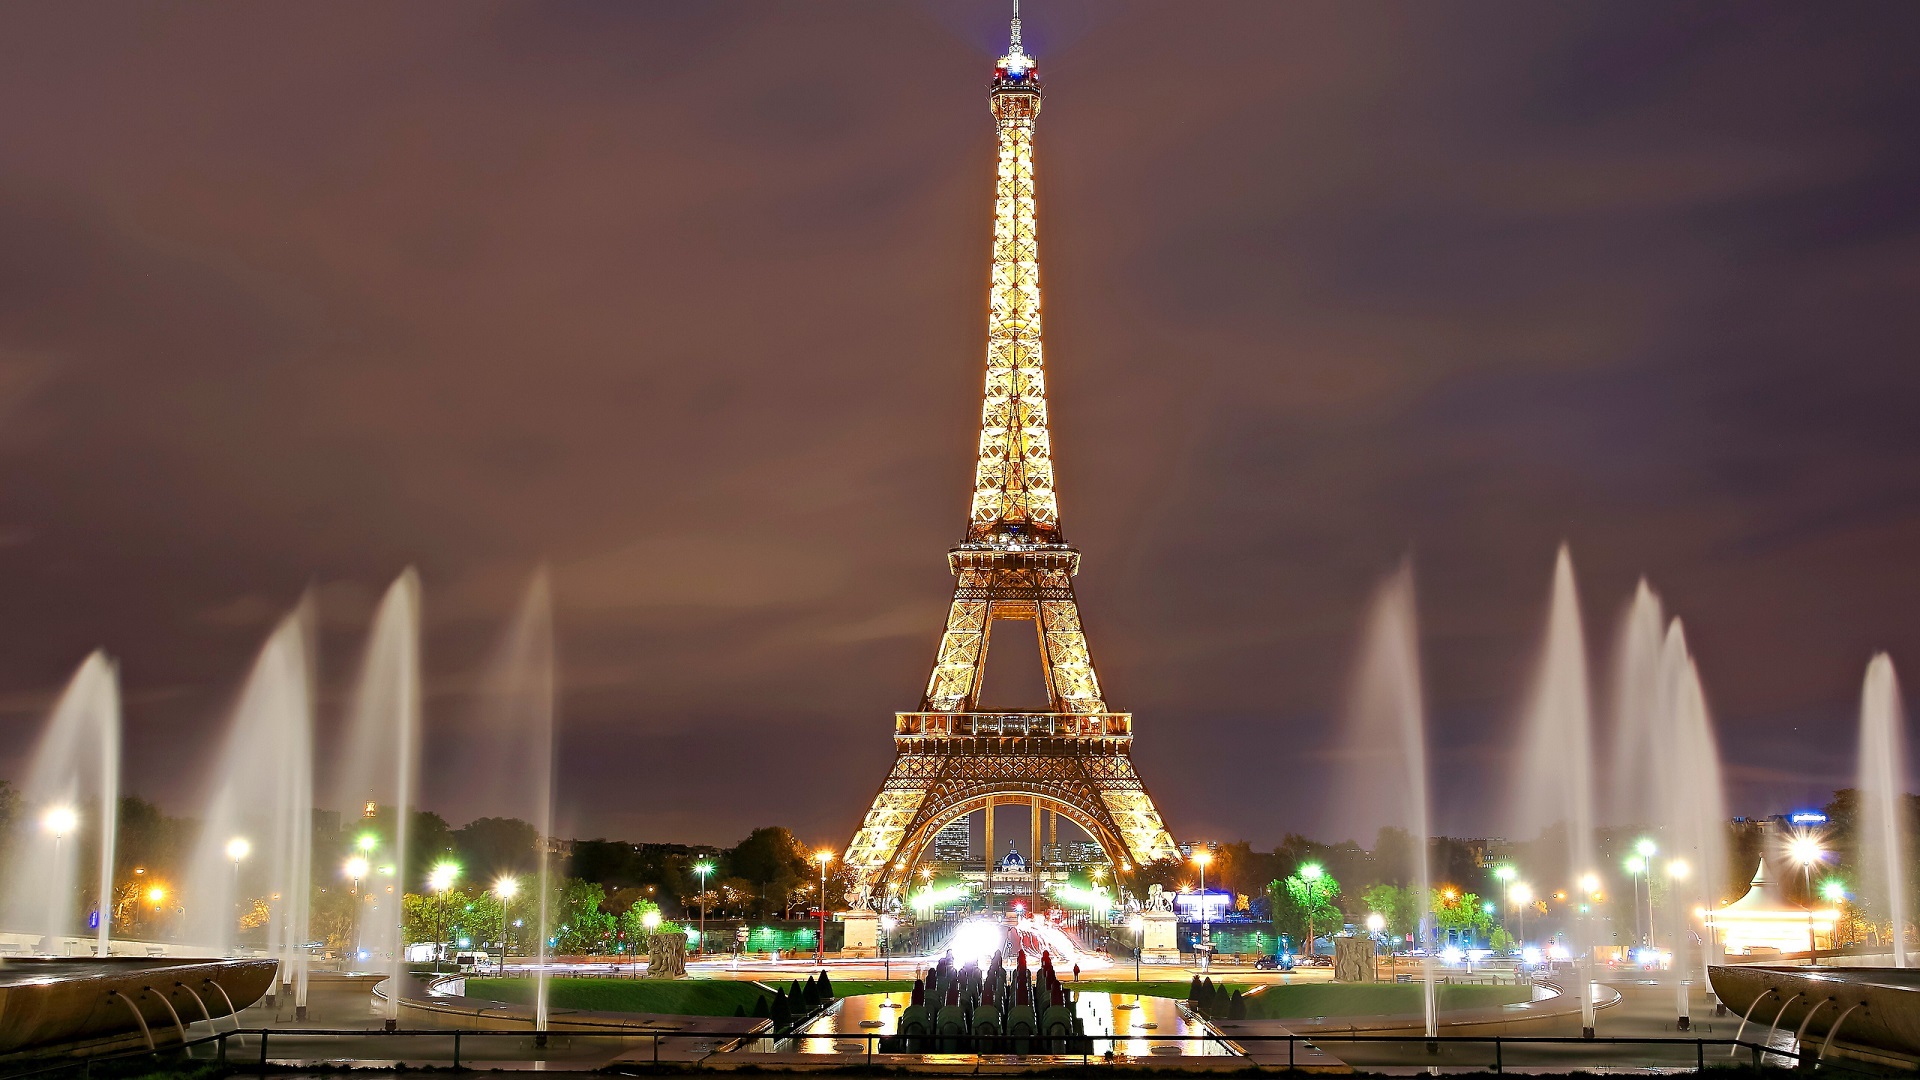 Eiffel Tower lighted at Night image - Free stock photo - Public Domain